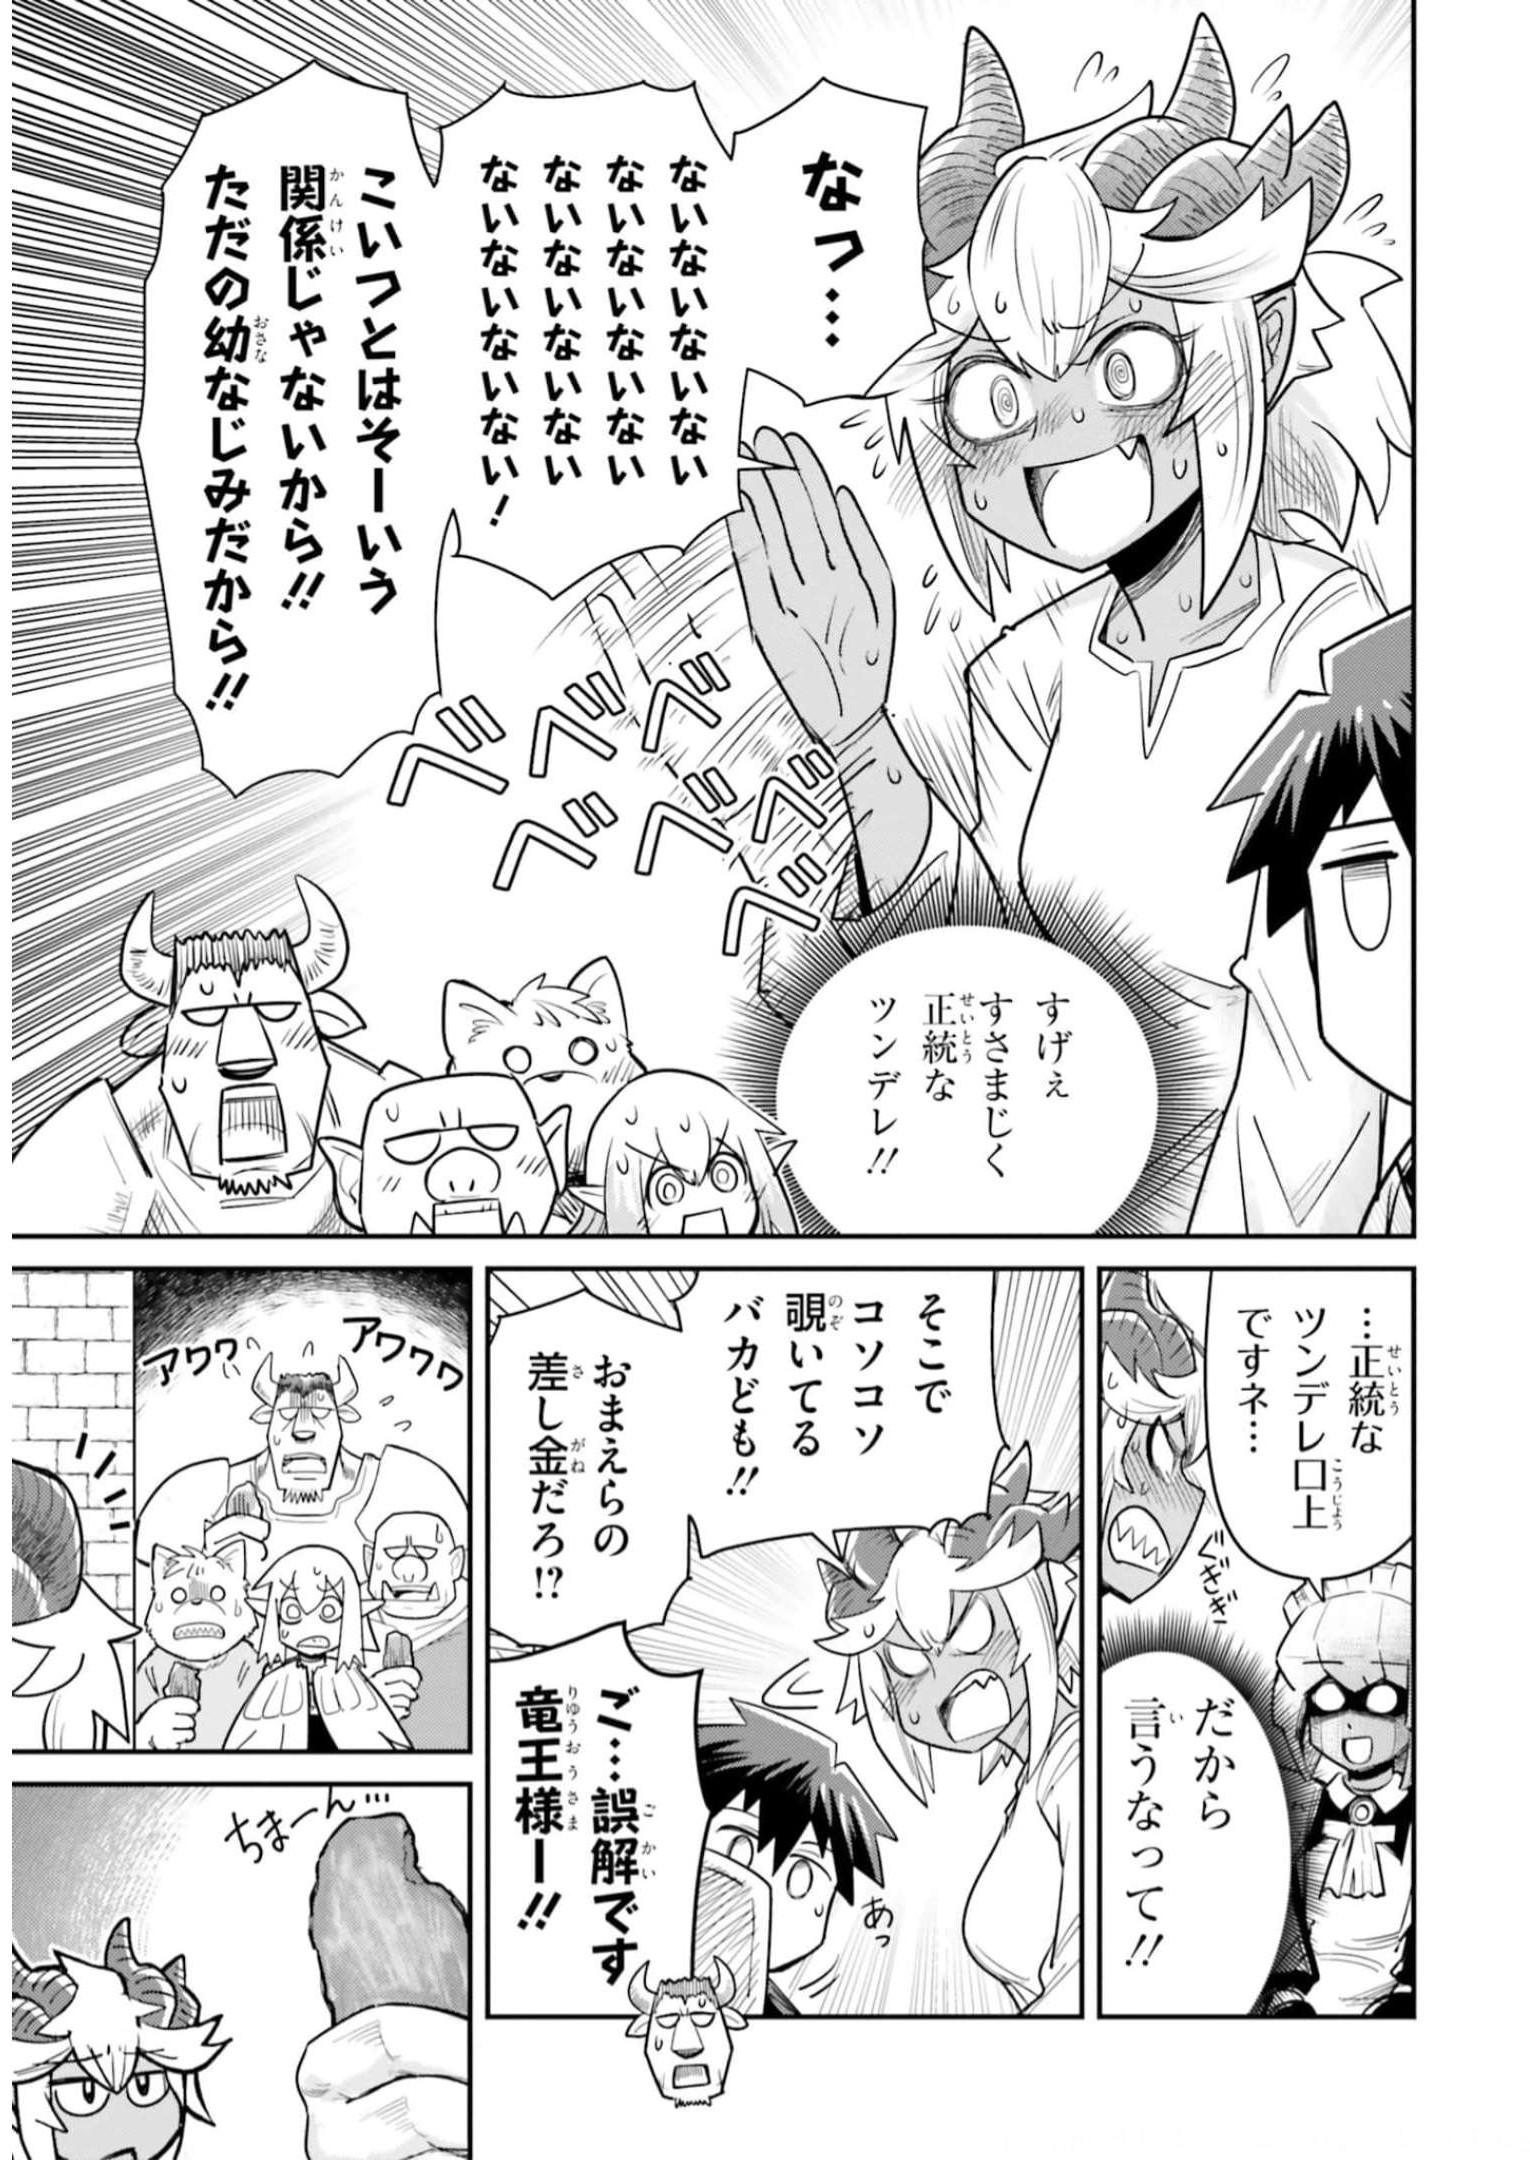 Dungeon Friends Forever Dungeon's Childhood Friend ダンジョンの幼なじみ 第13話 - Page 11